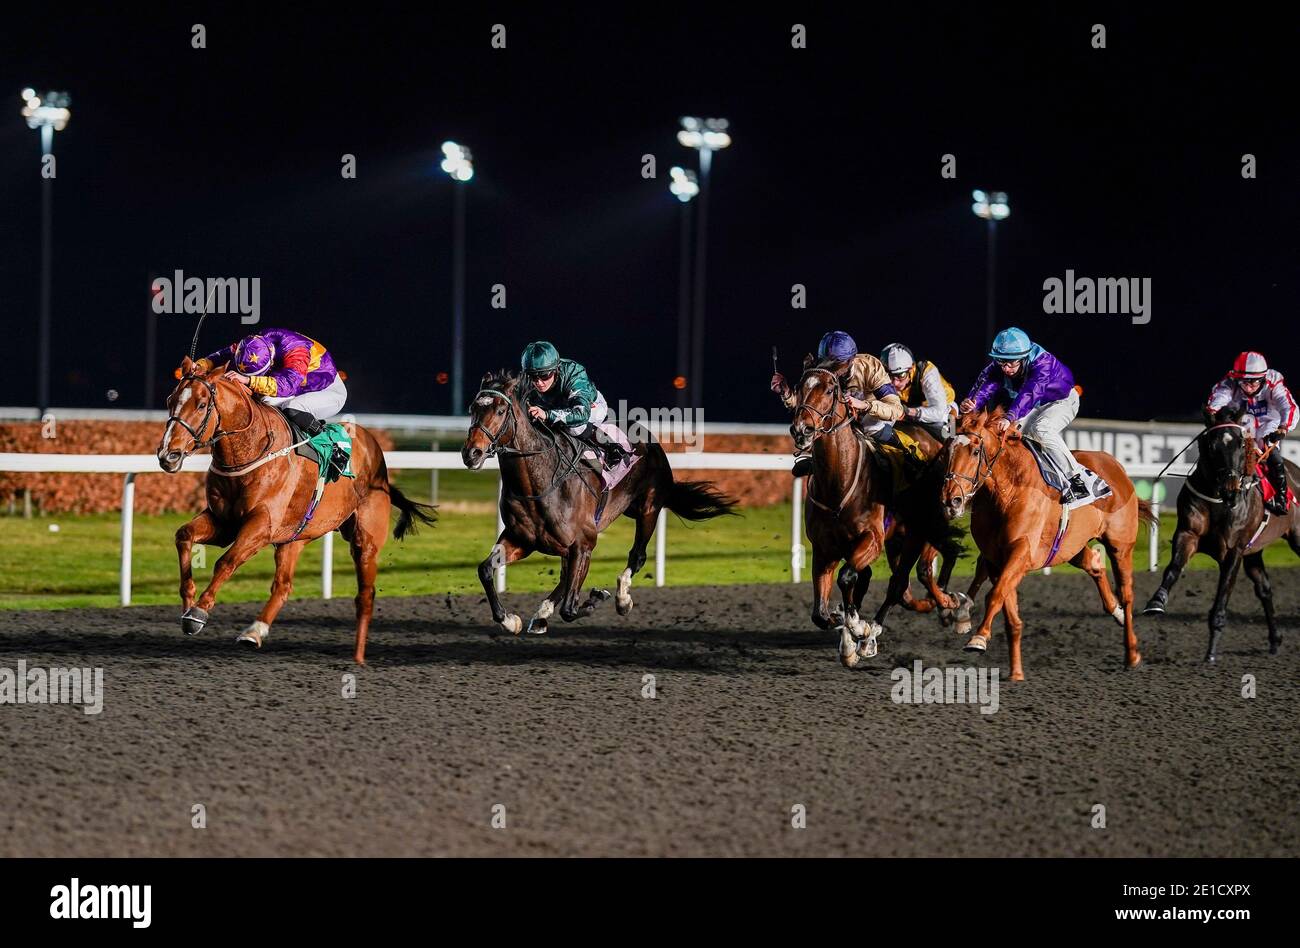 Andrew Breslin riding Lucky Deal (left) winning the Try Our New Super Boosts At Unibet Handicap at Kempton Park Racecourse. Stock Photo